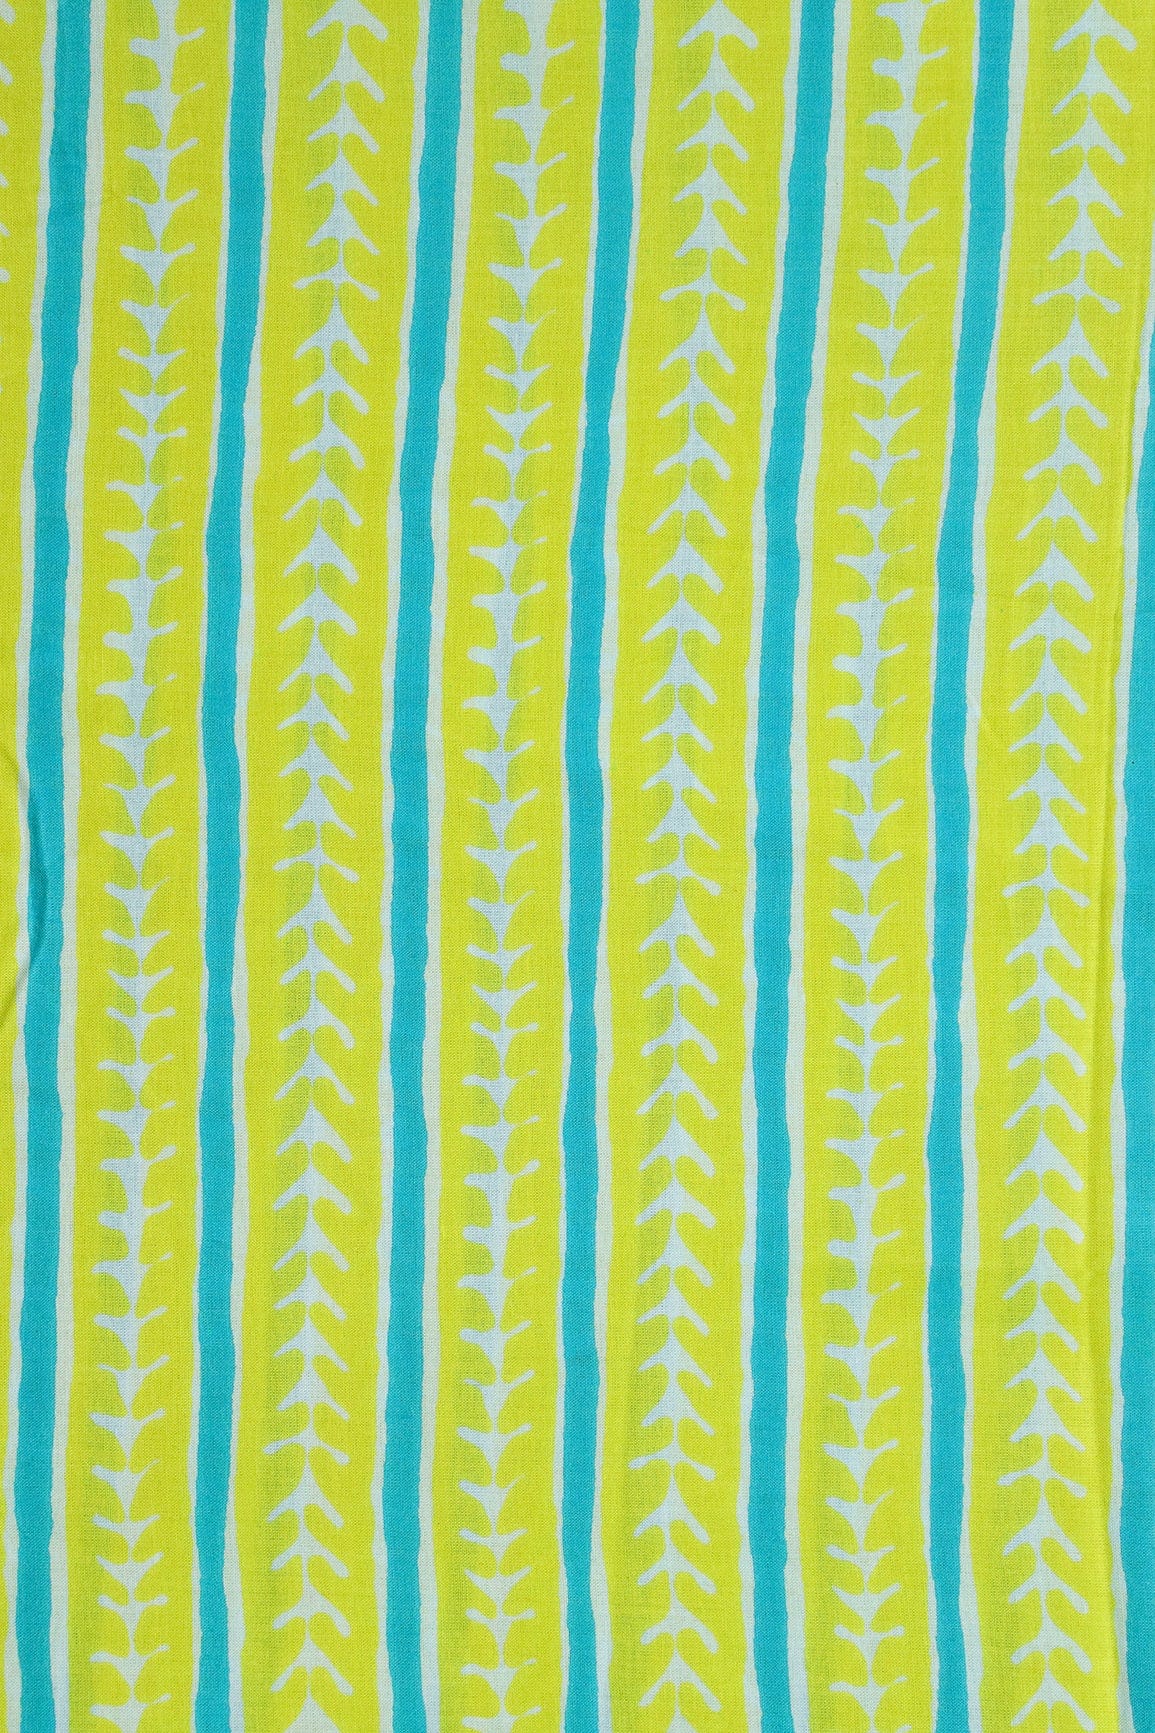 doeraa Prints Lemon Green And Turquoise Blue Stripes Print On Pure Mul Cotton Fabric